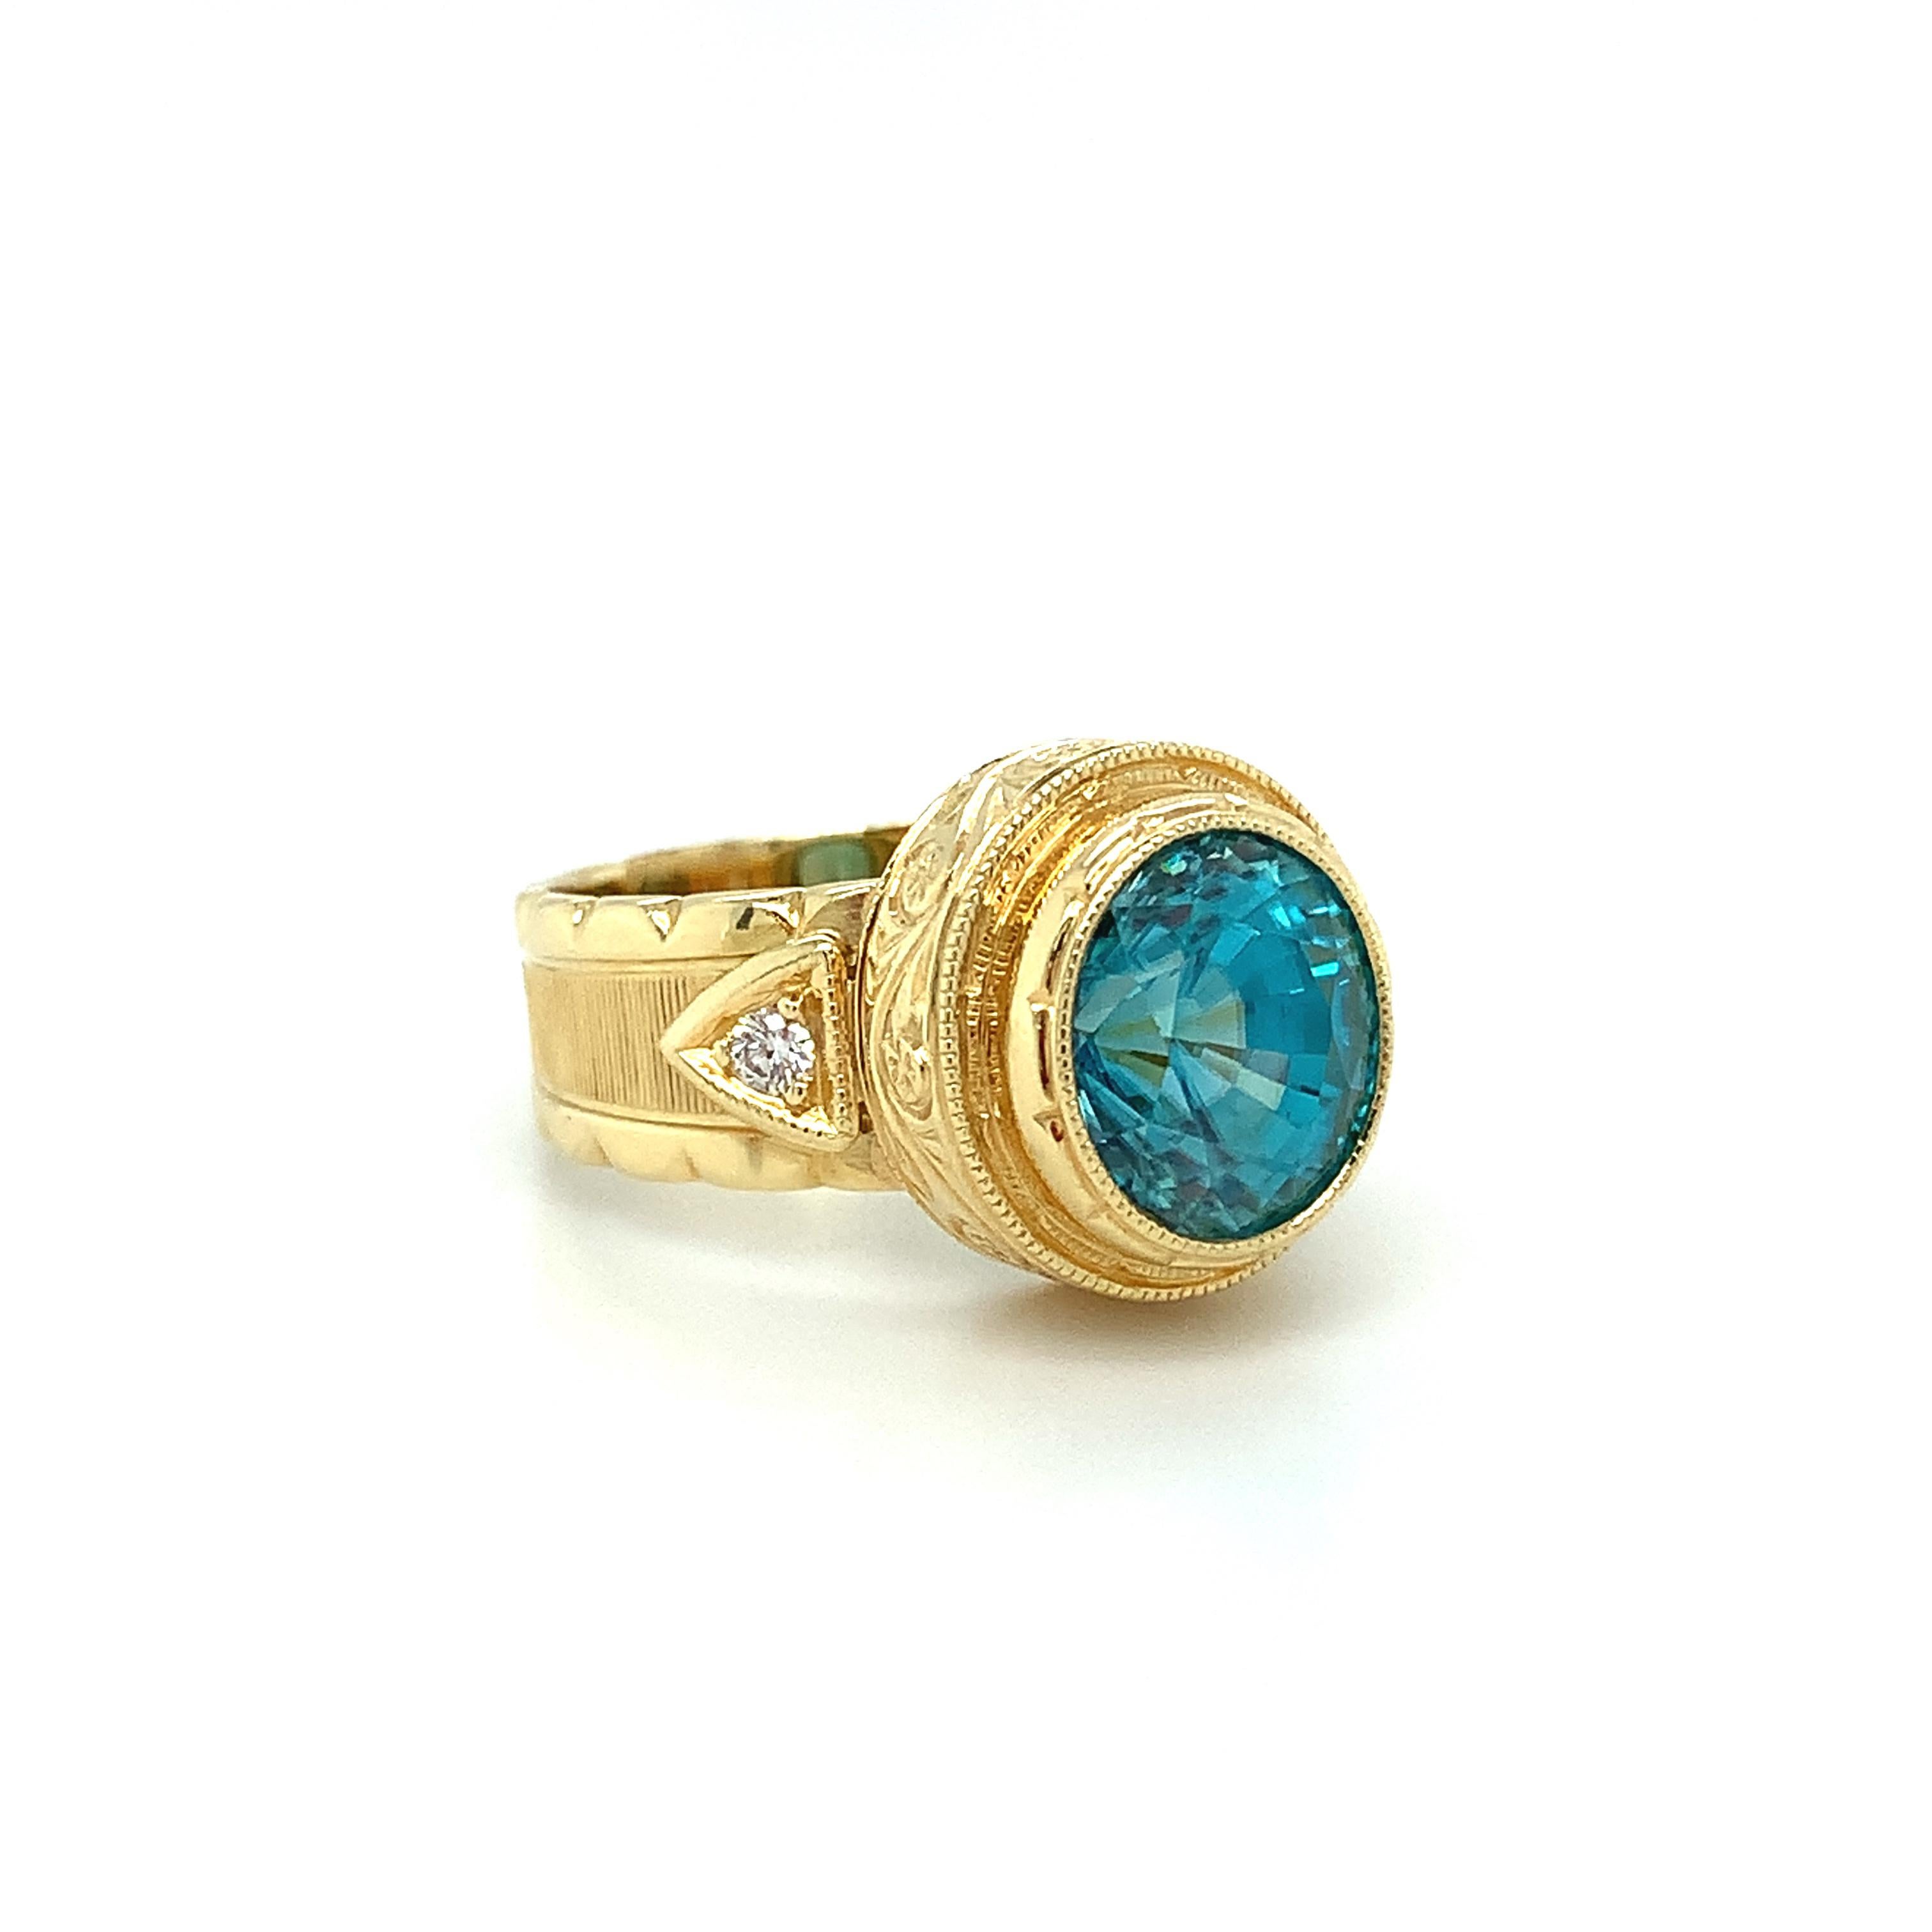 Artisan 4.72 Carat Blue Zircon and Diamond Hand-Engraved Band Ring in 18k Yellow Gold   For Sale